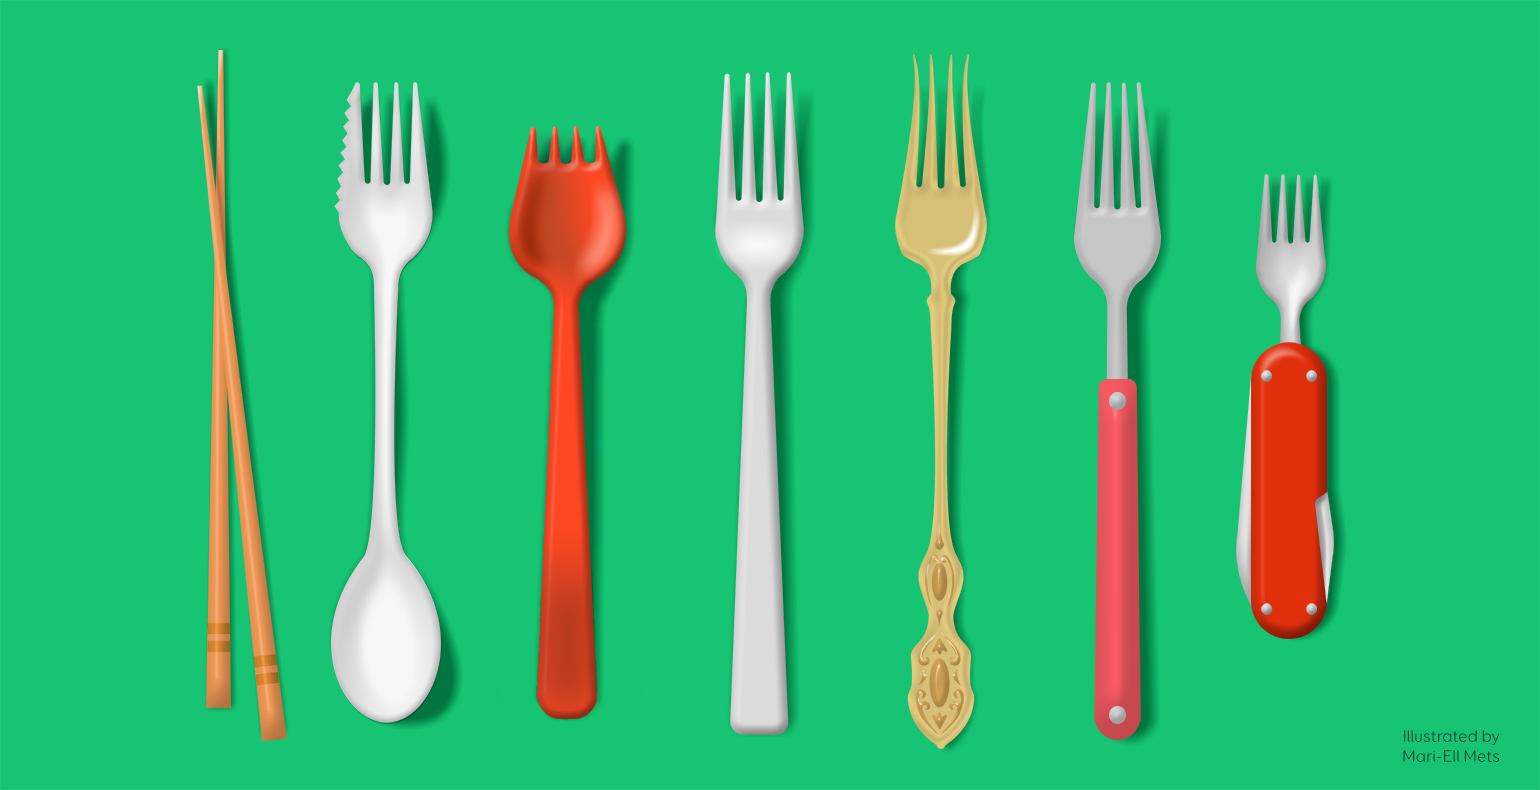 The picture about different kind of forks - Illustrated by Mari-Ell Mets